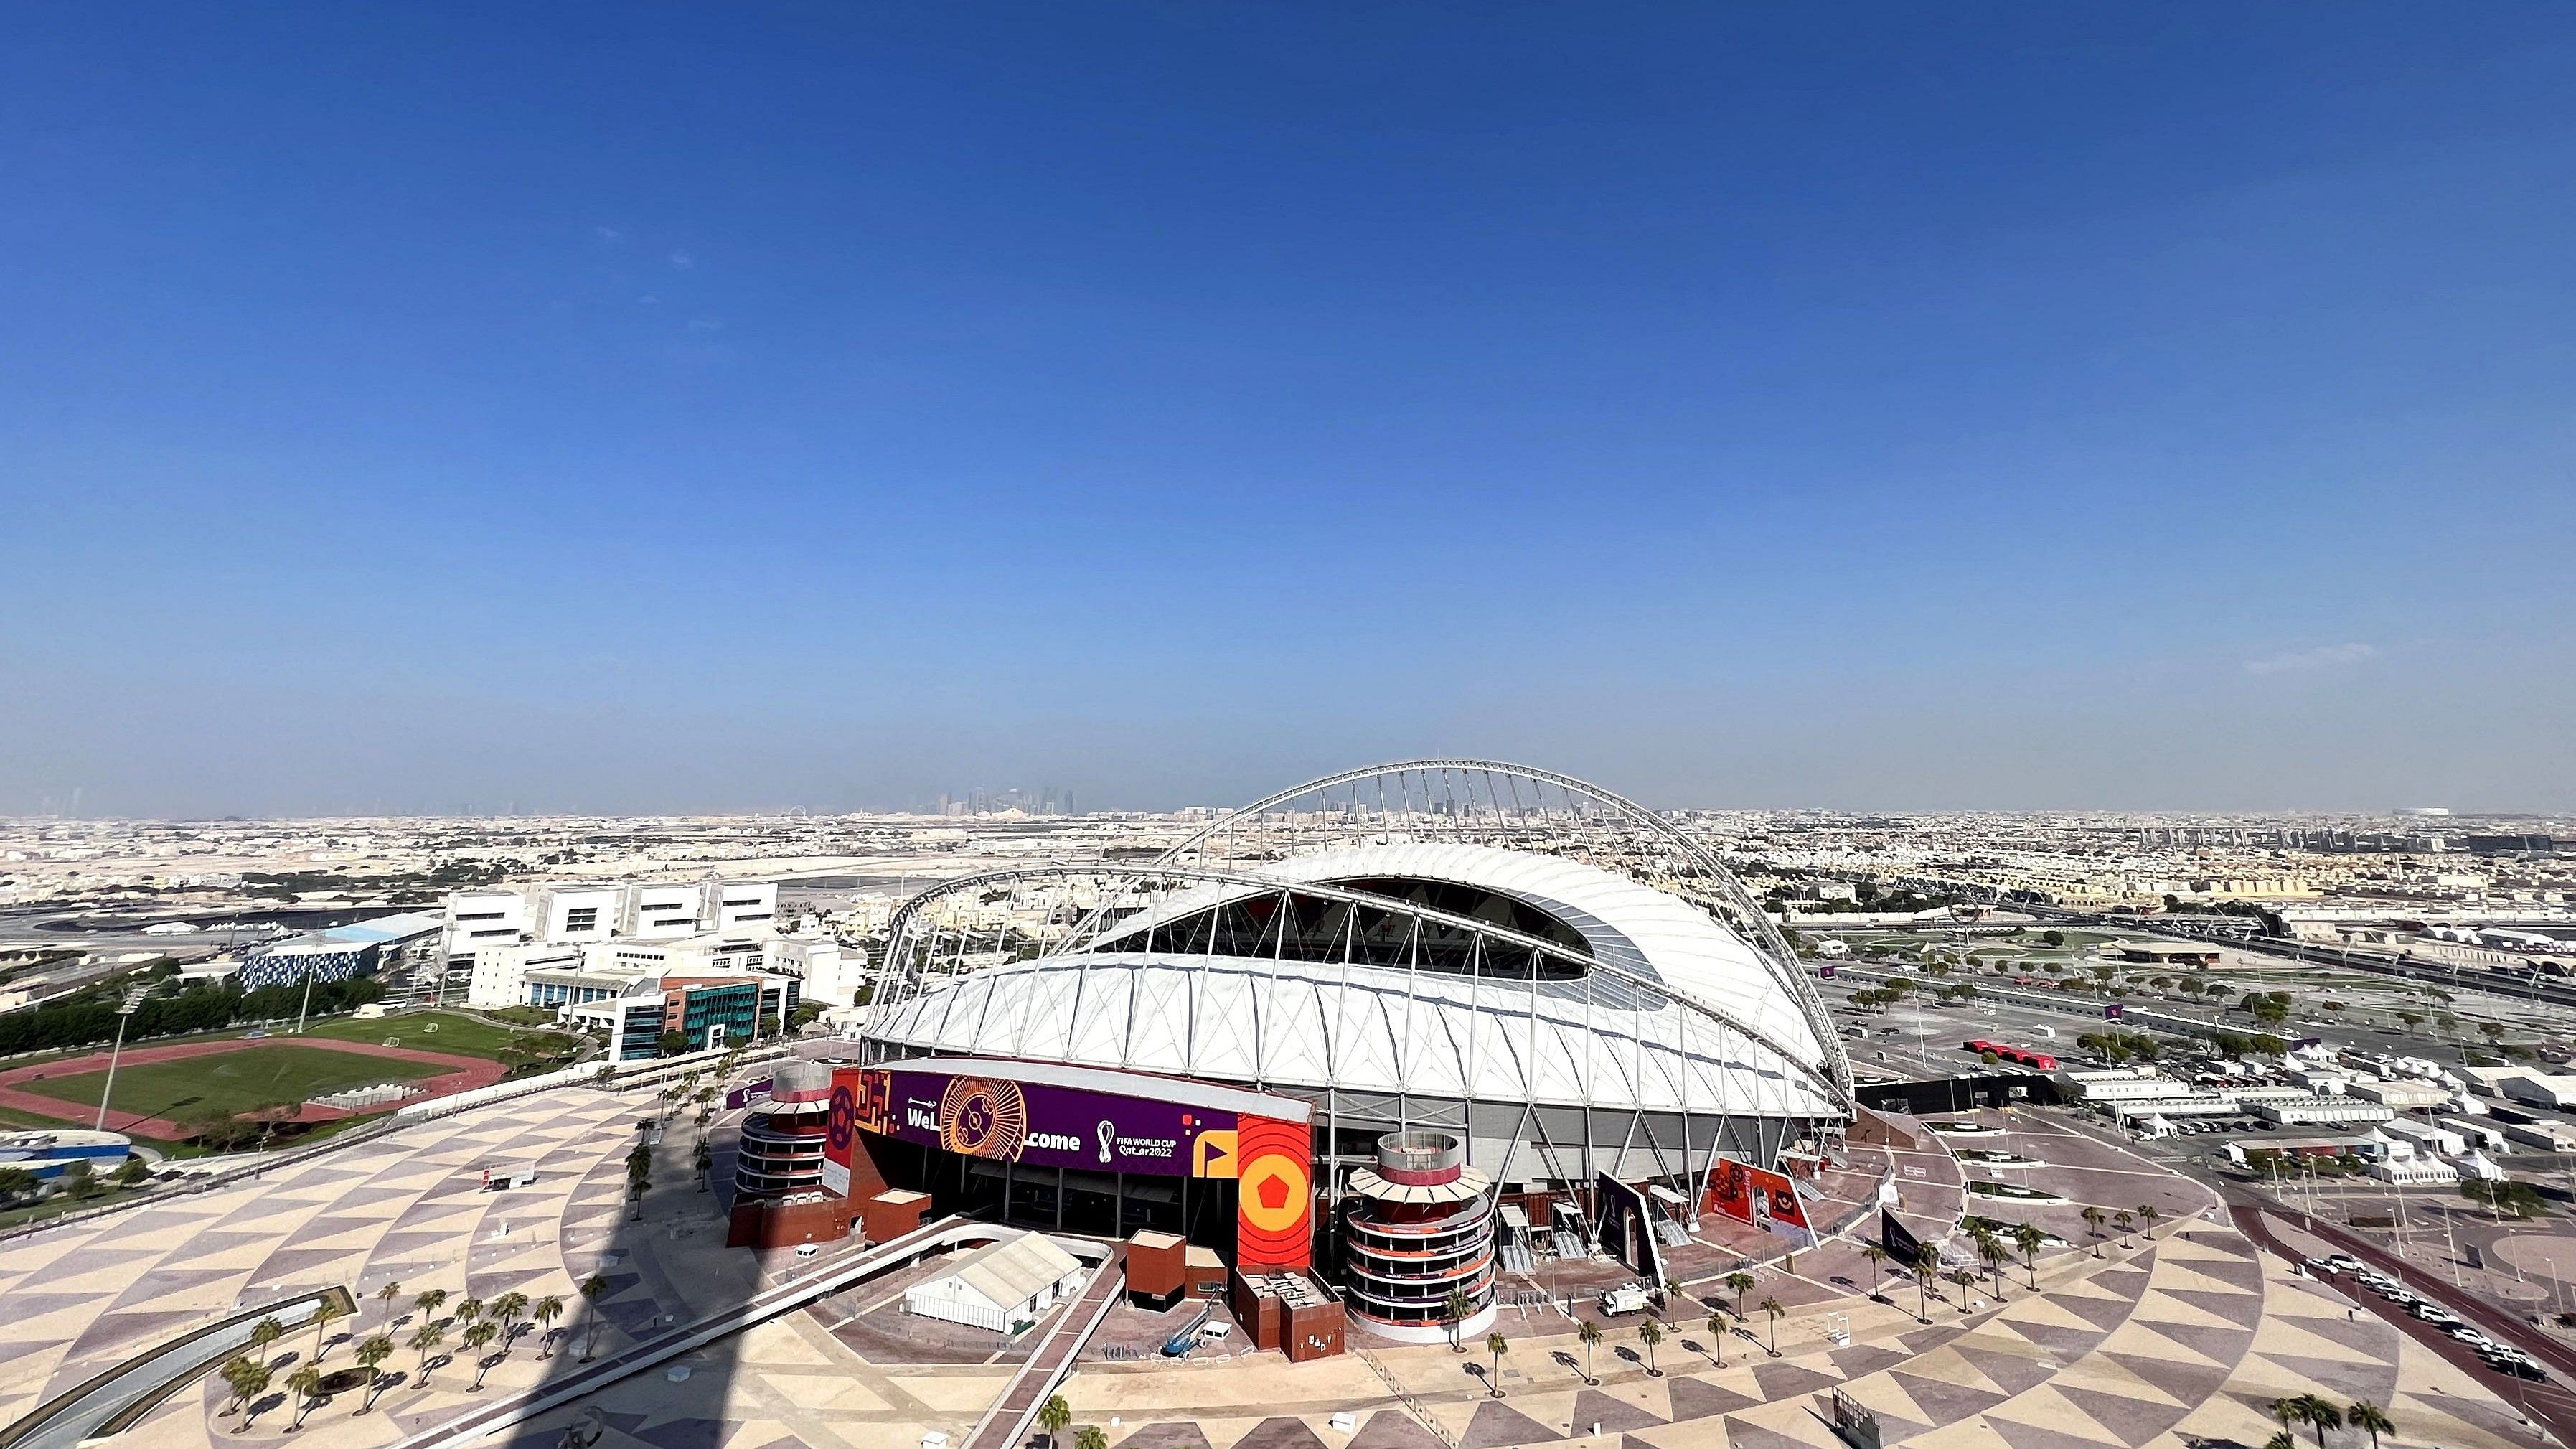 A view shows the Khalifa International Stadium in Doha on October 29, 2022, ahead of the Qatar 2022 FIFA World Cup football tournament. Credit: AFP Photo